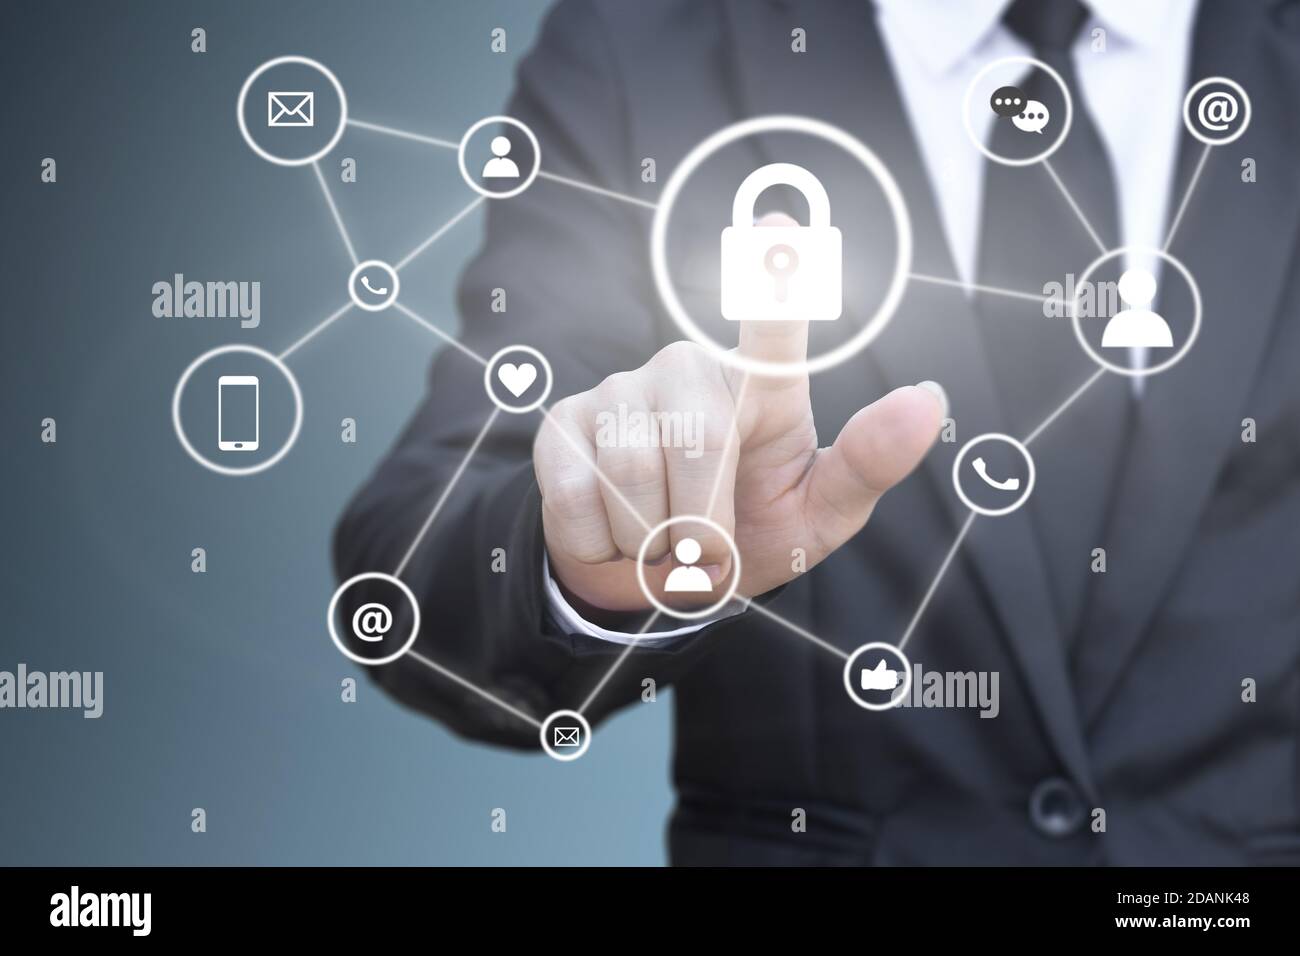 Businessman hand pressing lock icon on virtual screen for social network connection. Concept of personal data security. Stock Photo